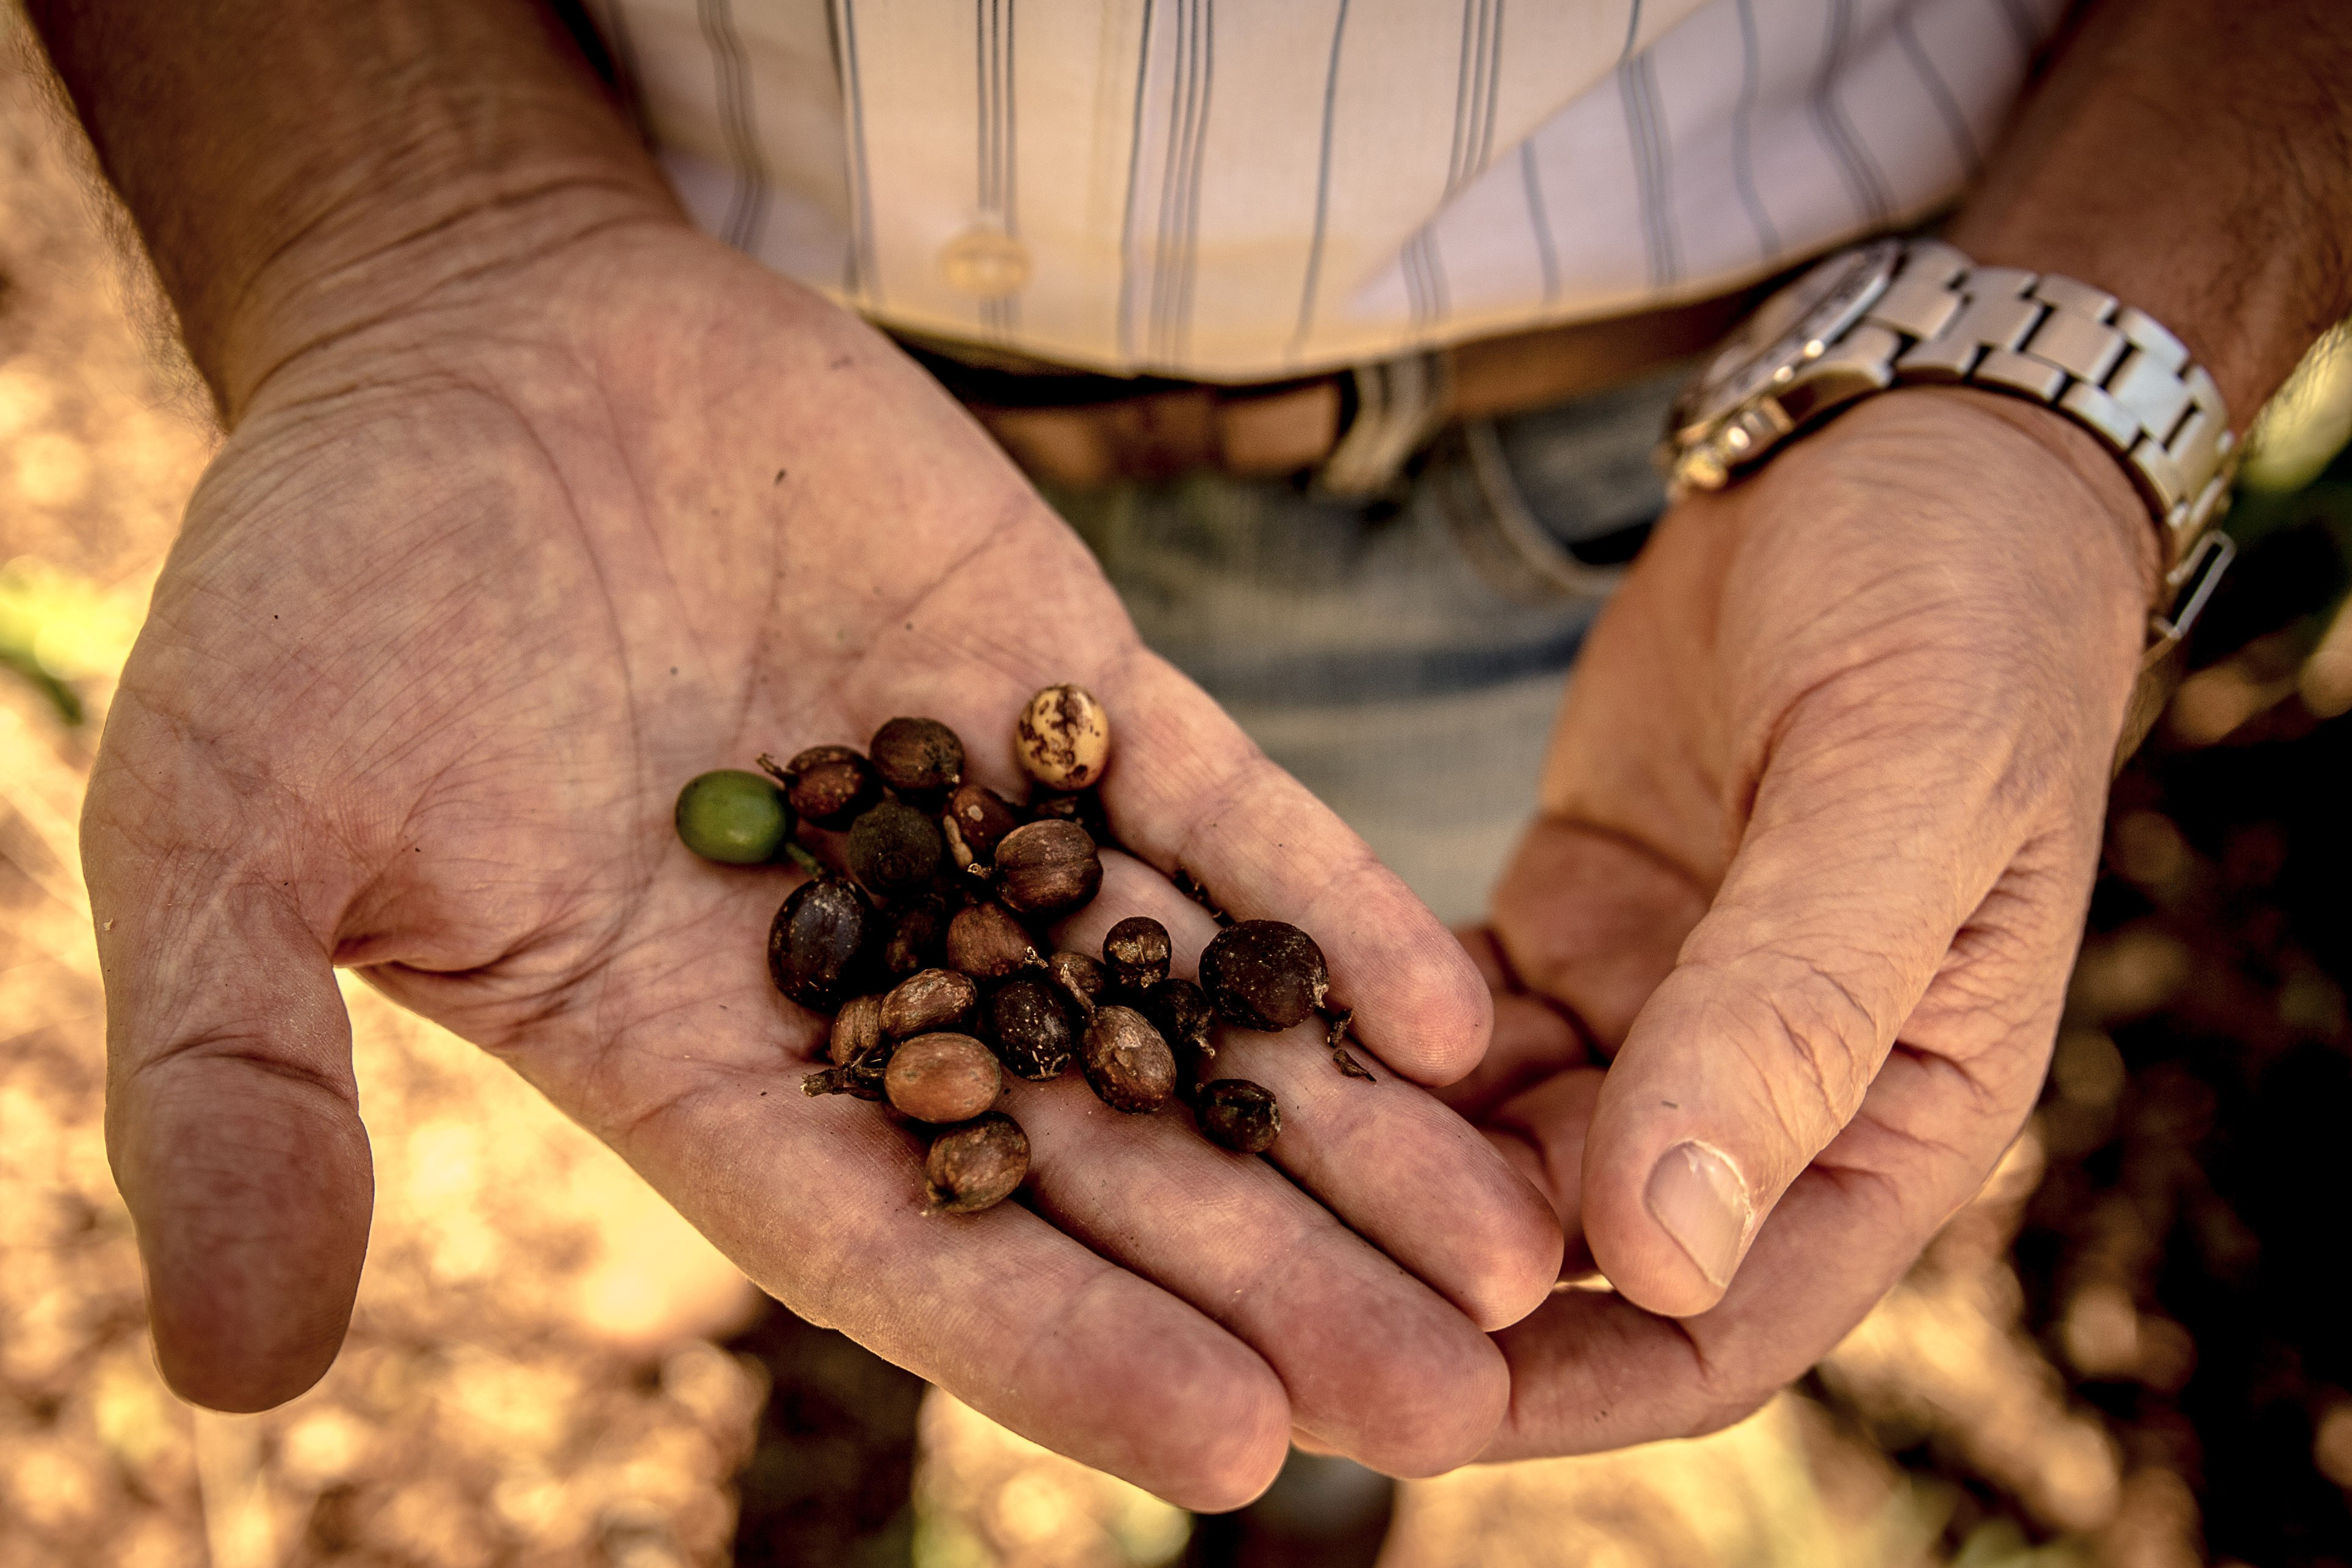 Coffee sales this season will be down after southeastern Brazil deals with one of the worst droughts in decades. (Anadolu Agency/Getty Images)